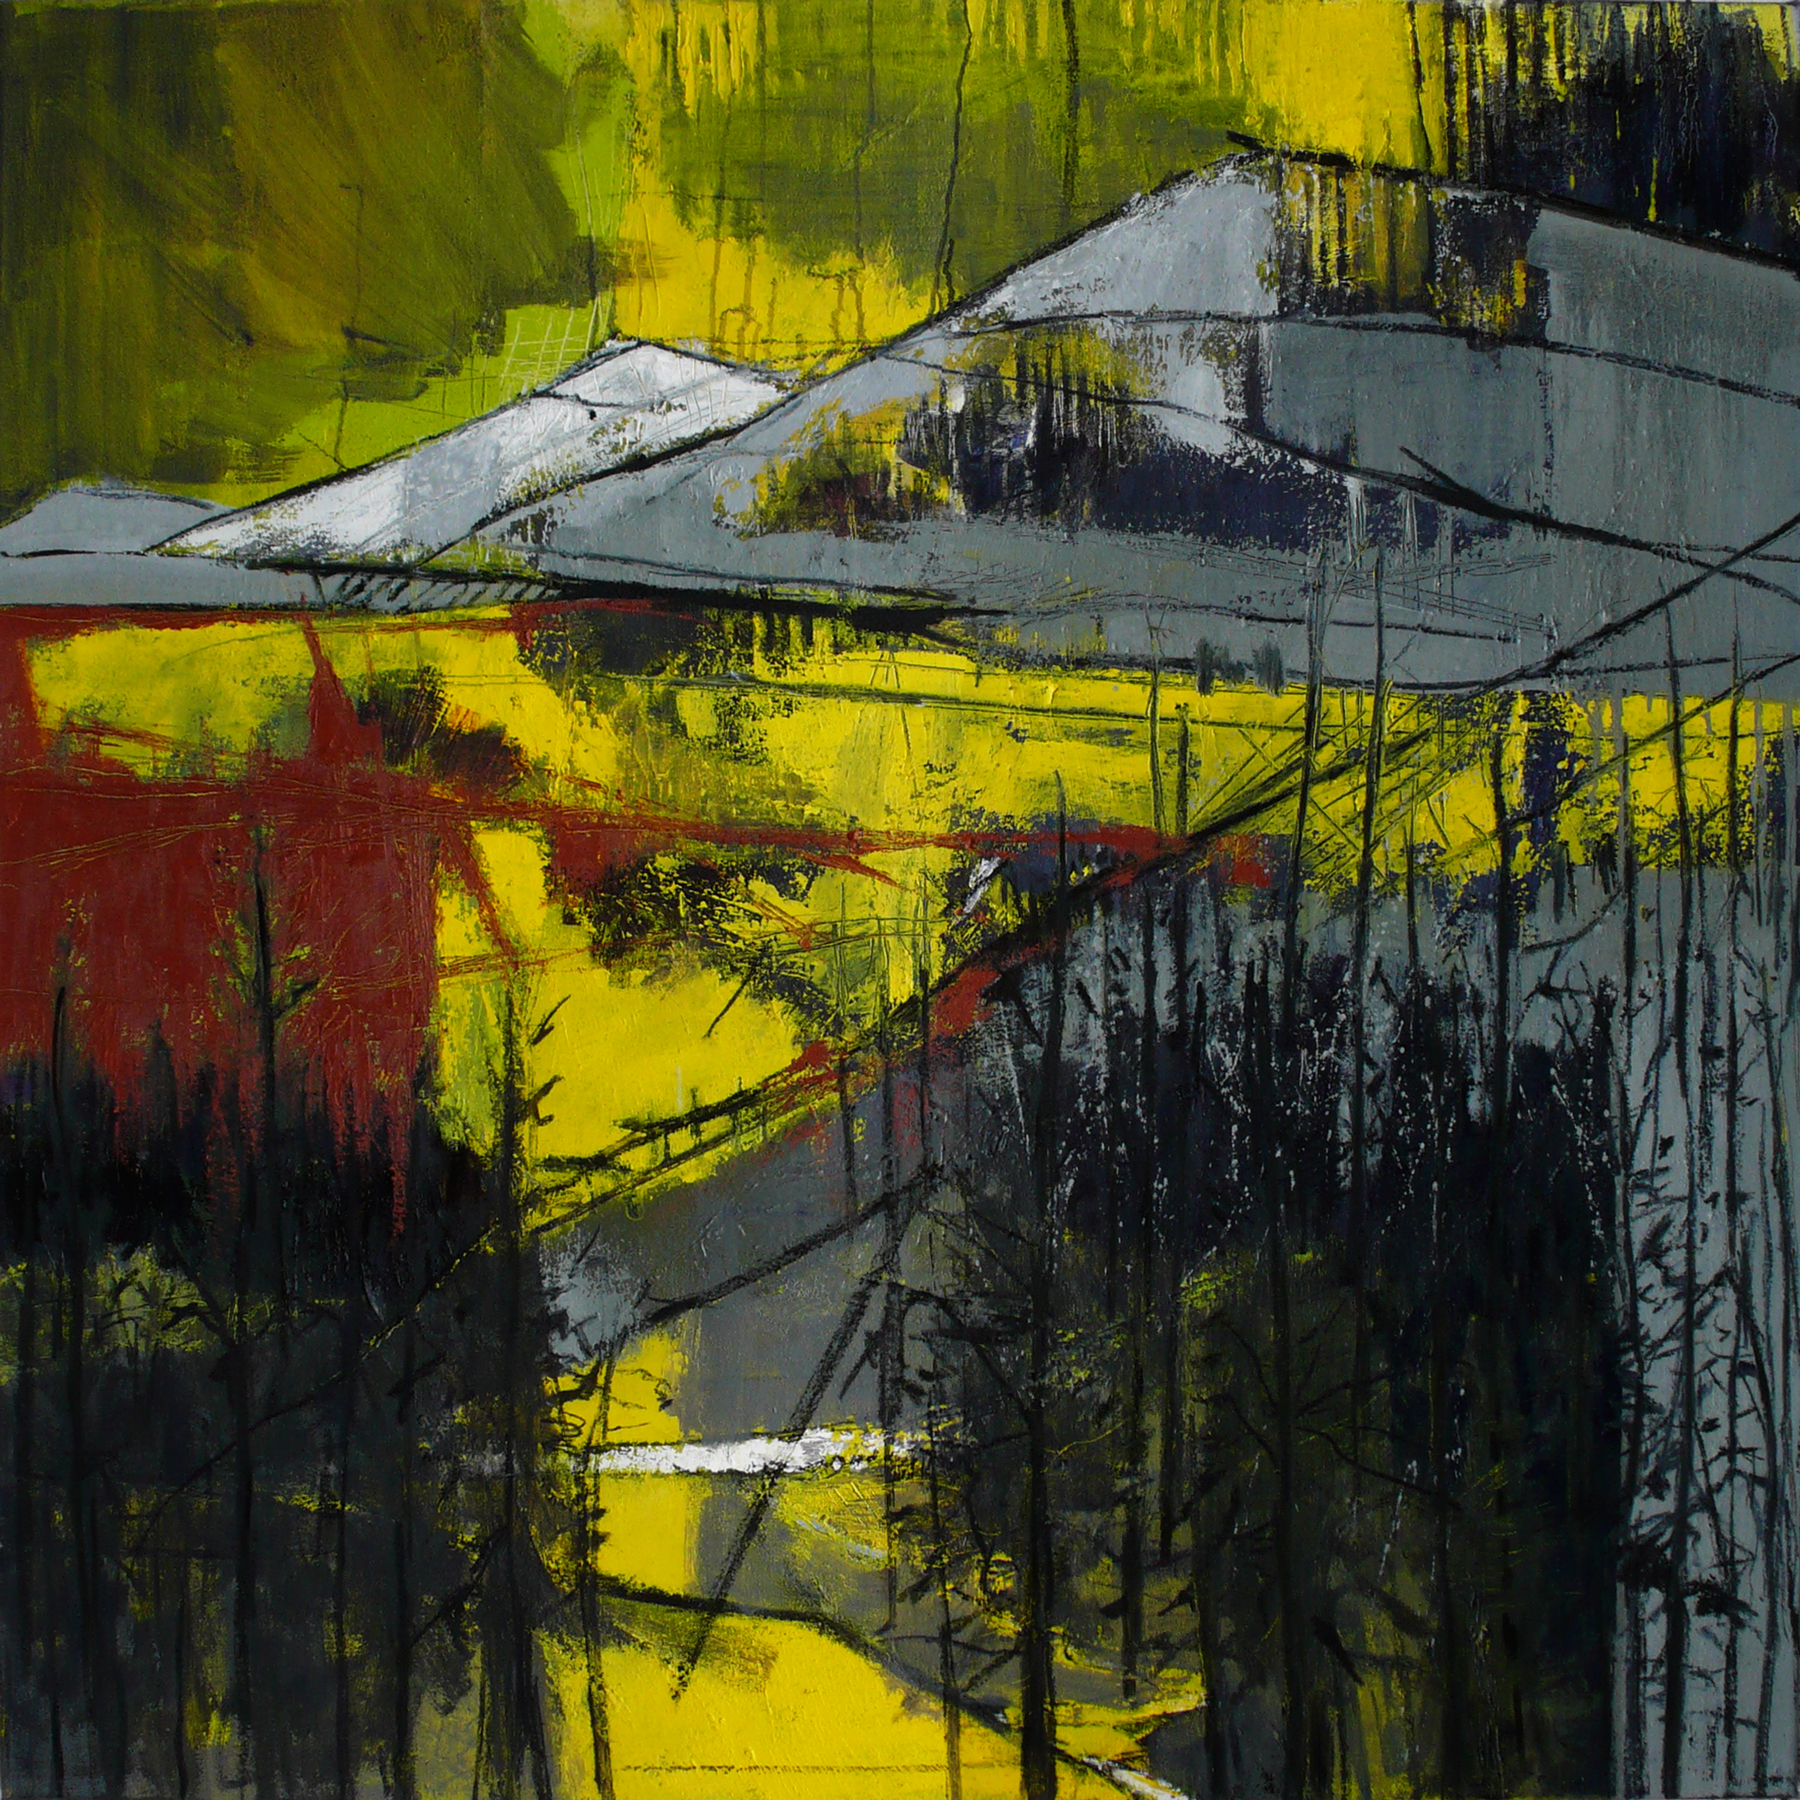 Roughly textured oil painting, predominately yellow, gray and black, showing forest and mountains.